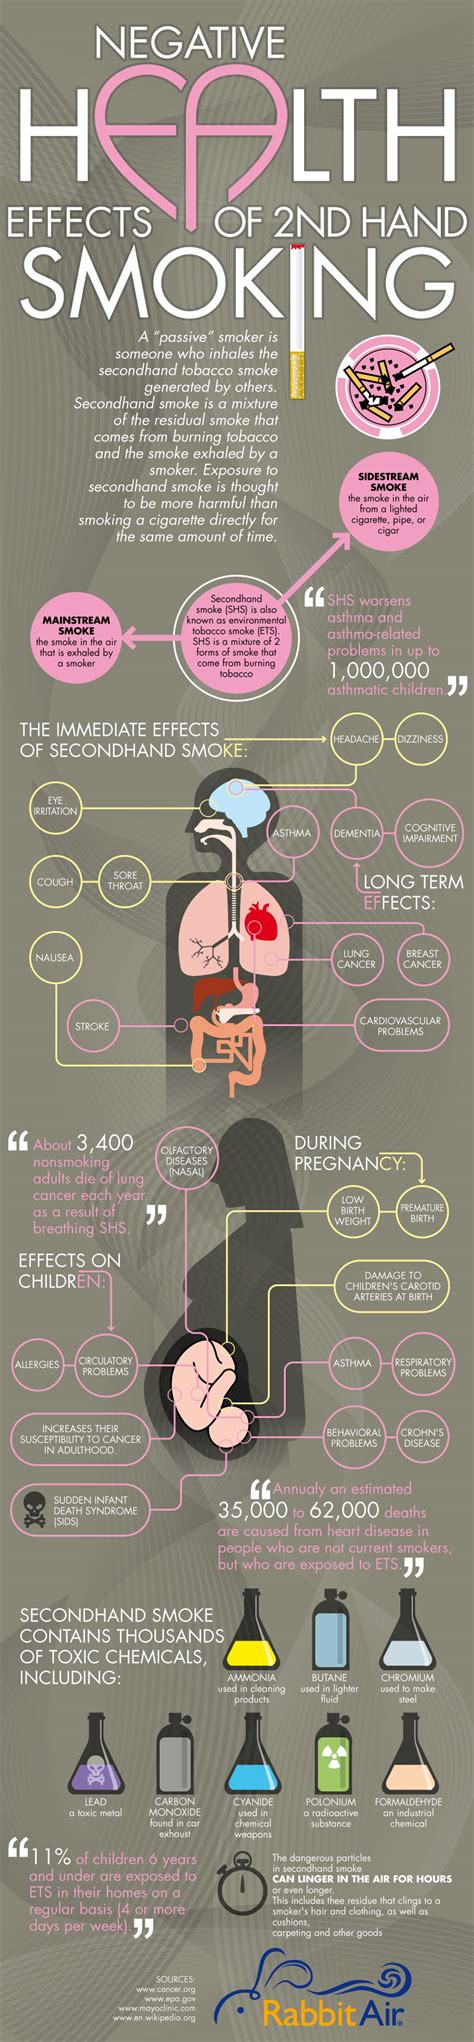 Health Effects Of Passive Smoking Infographic